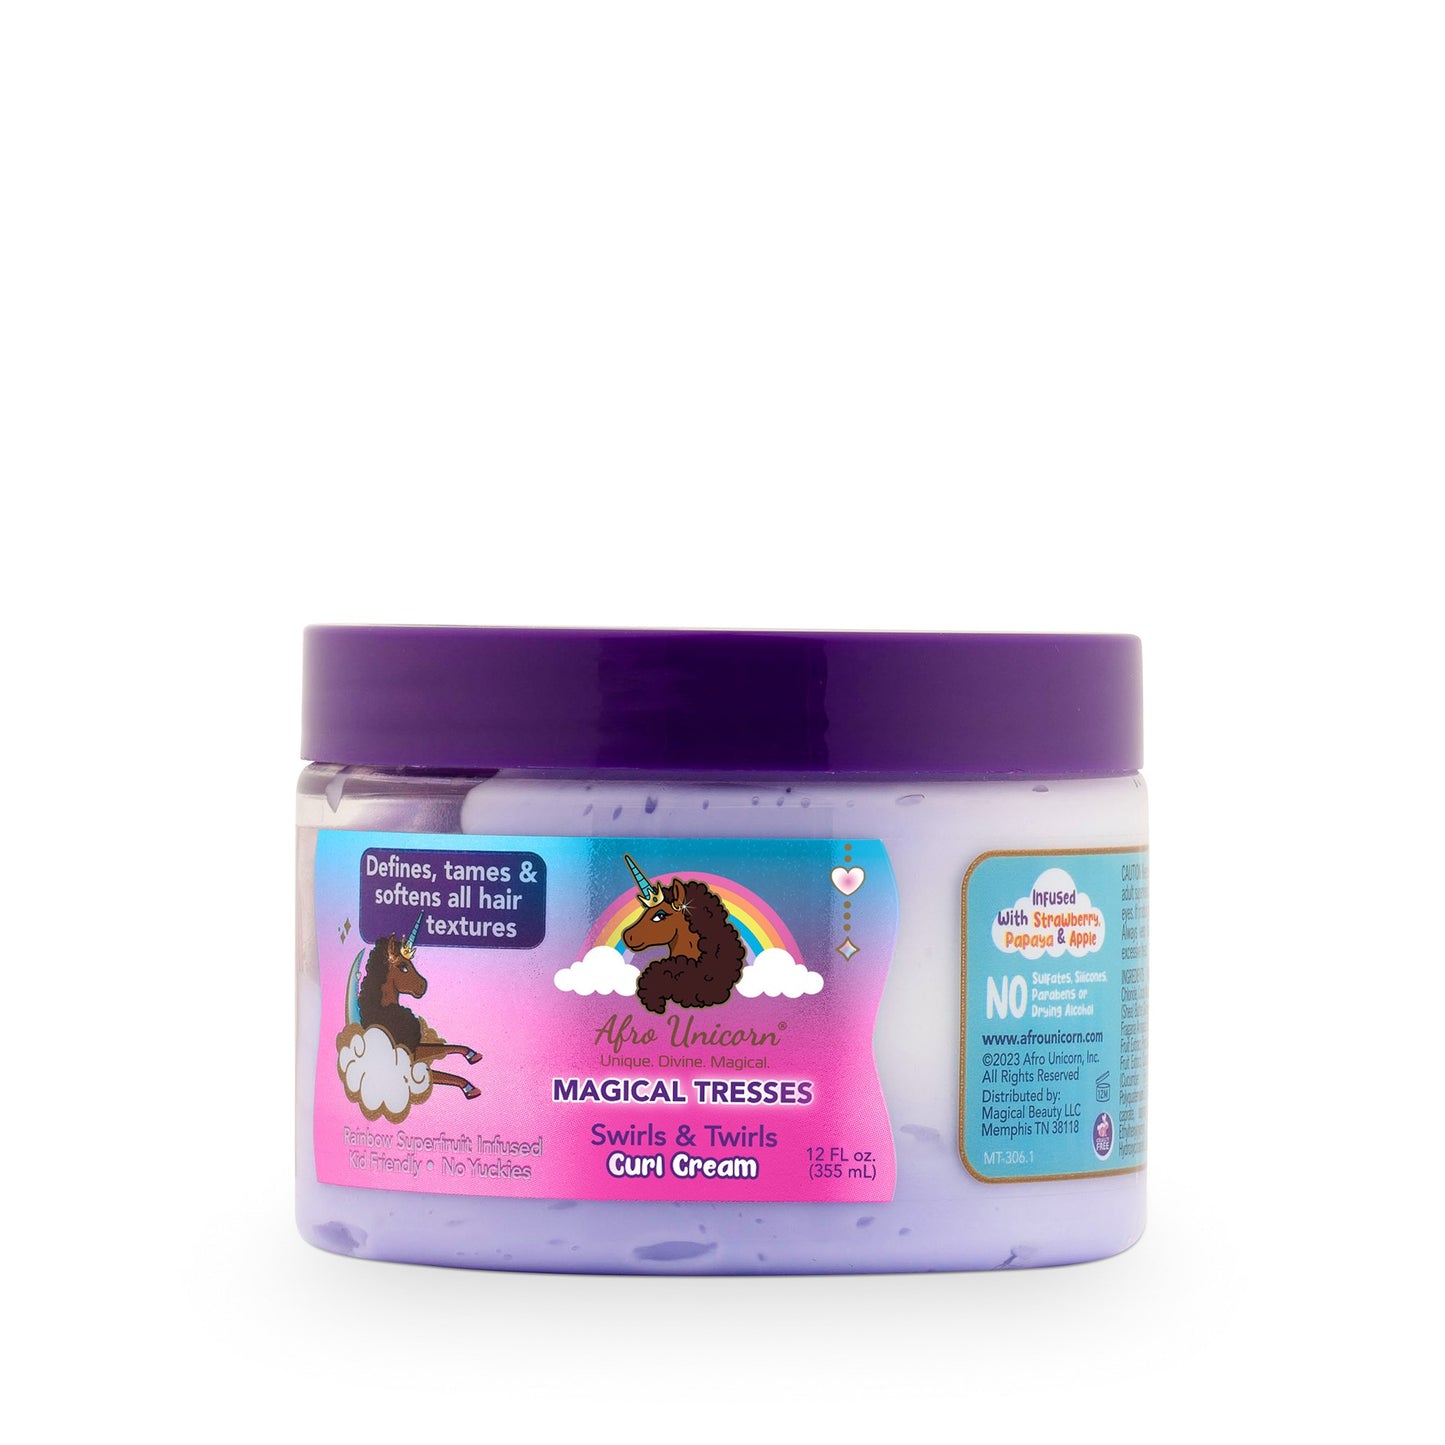 Afro Unicorn Curl Cream on a white background.